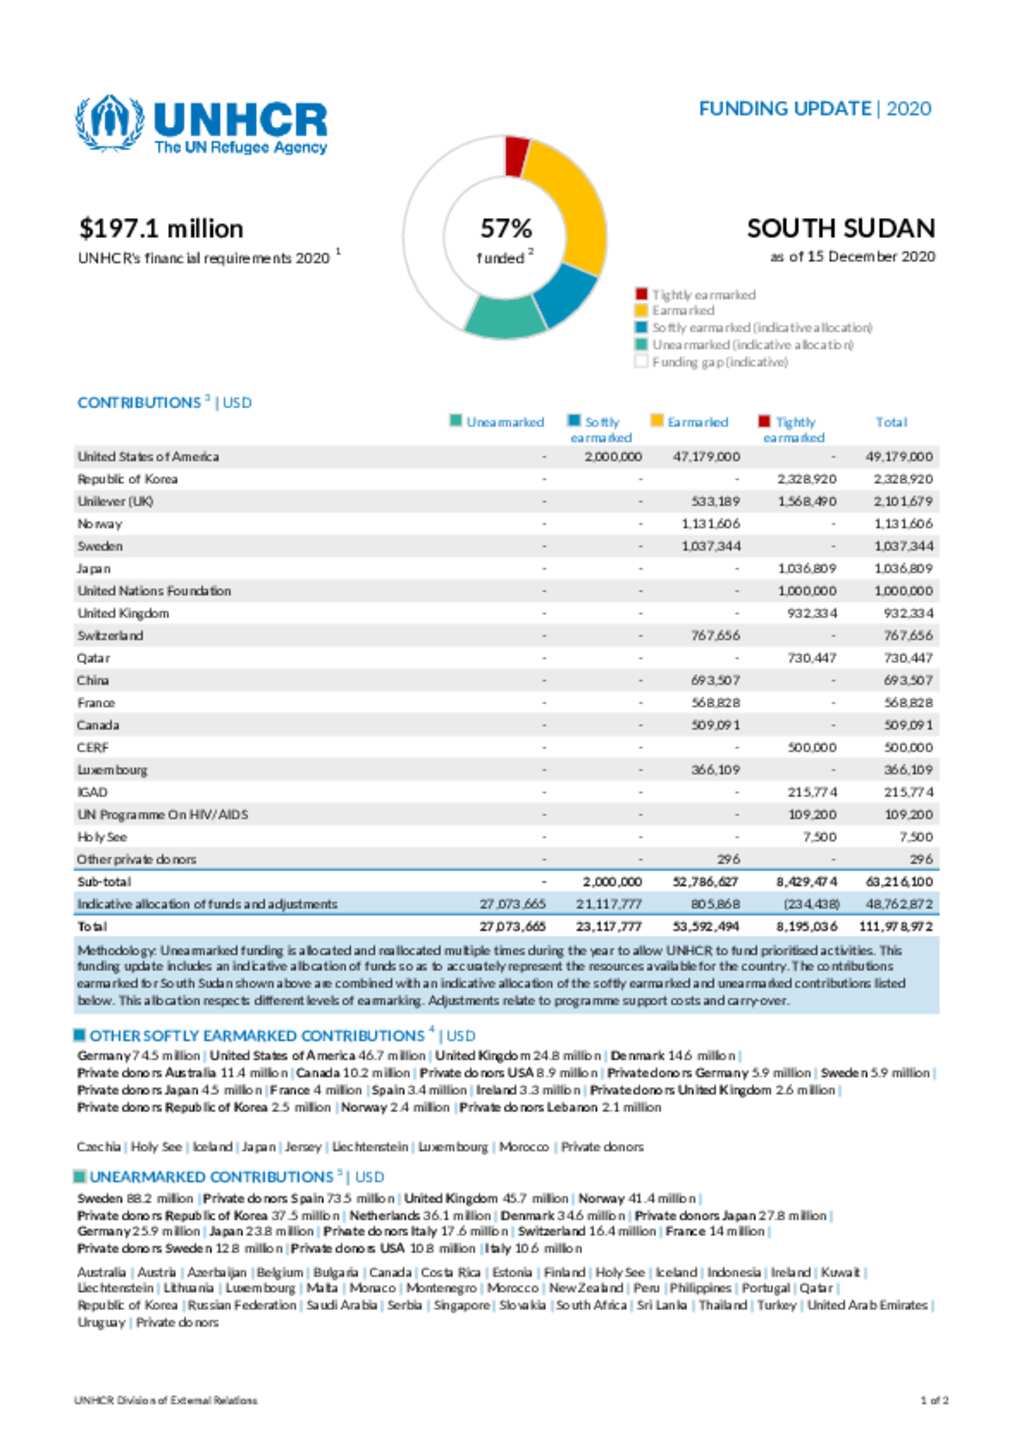 Document South Sudan Funding Update as of 15 December 2020